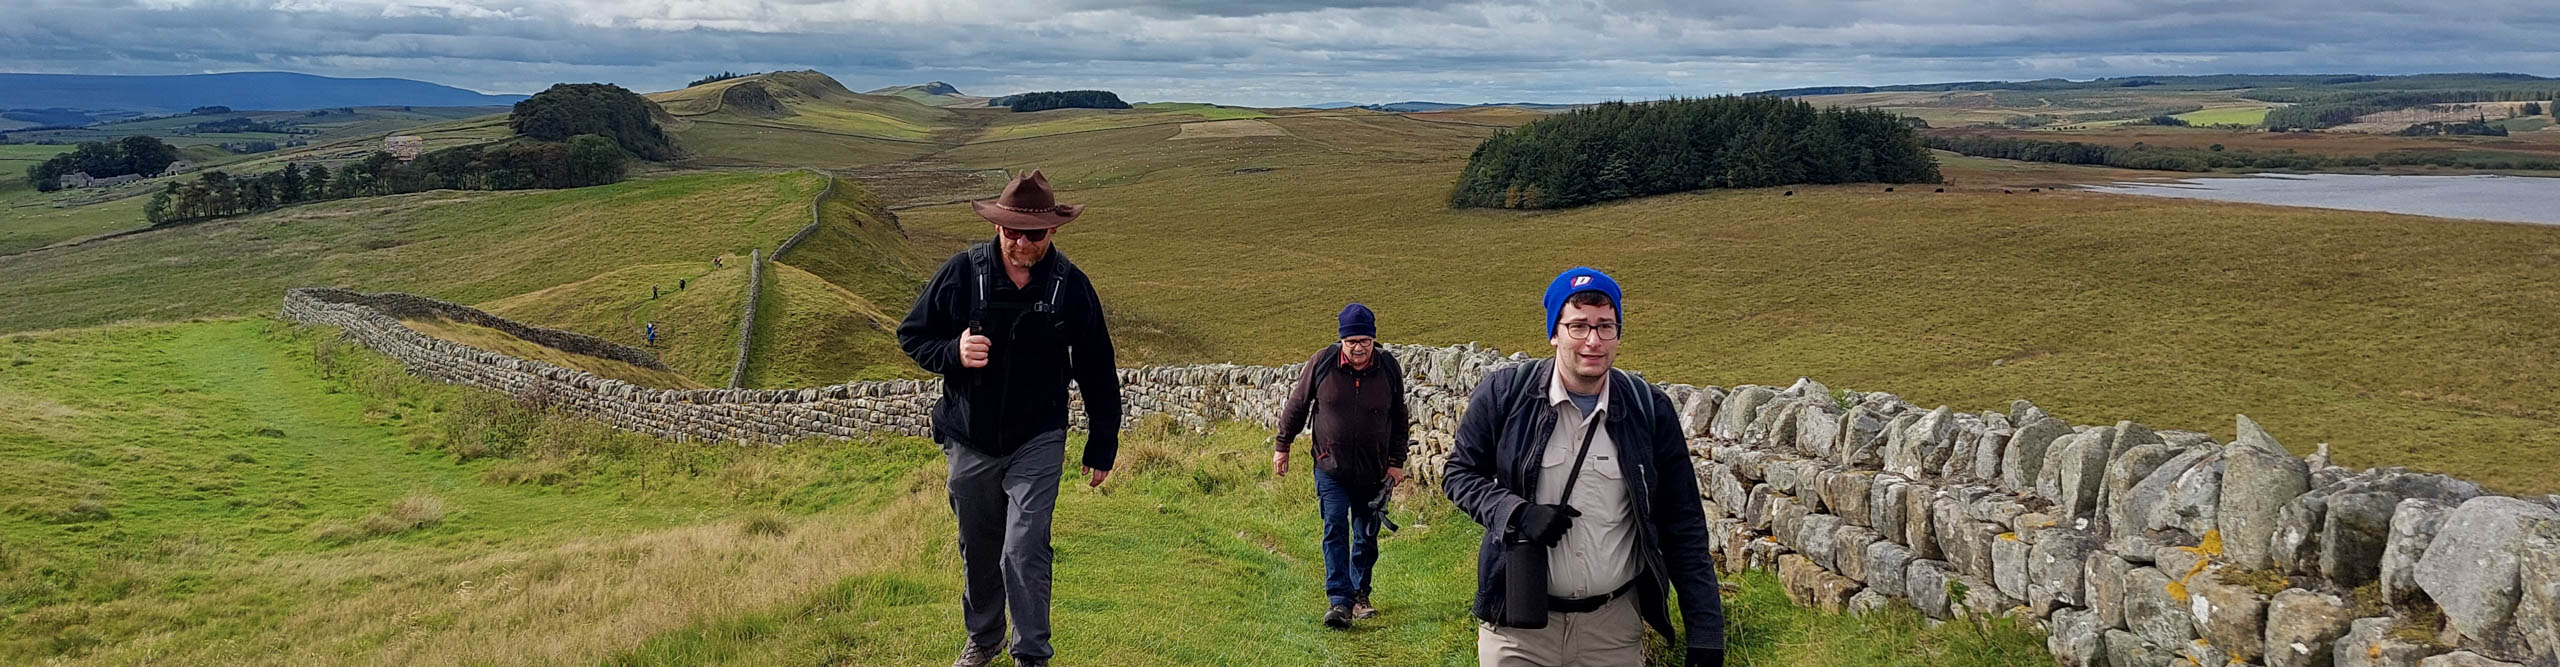  Hikers at Hadrians Wall on a cloudy day, Northumberland, England